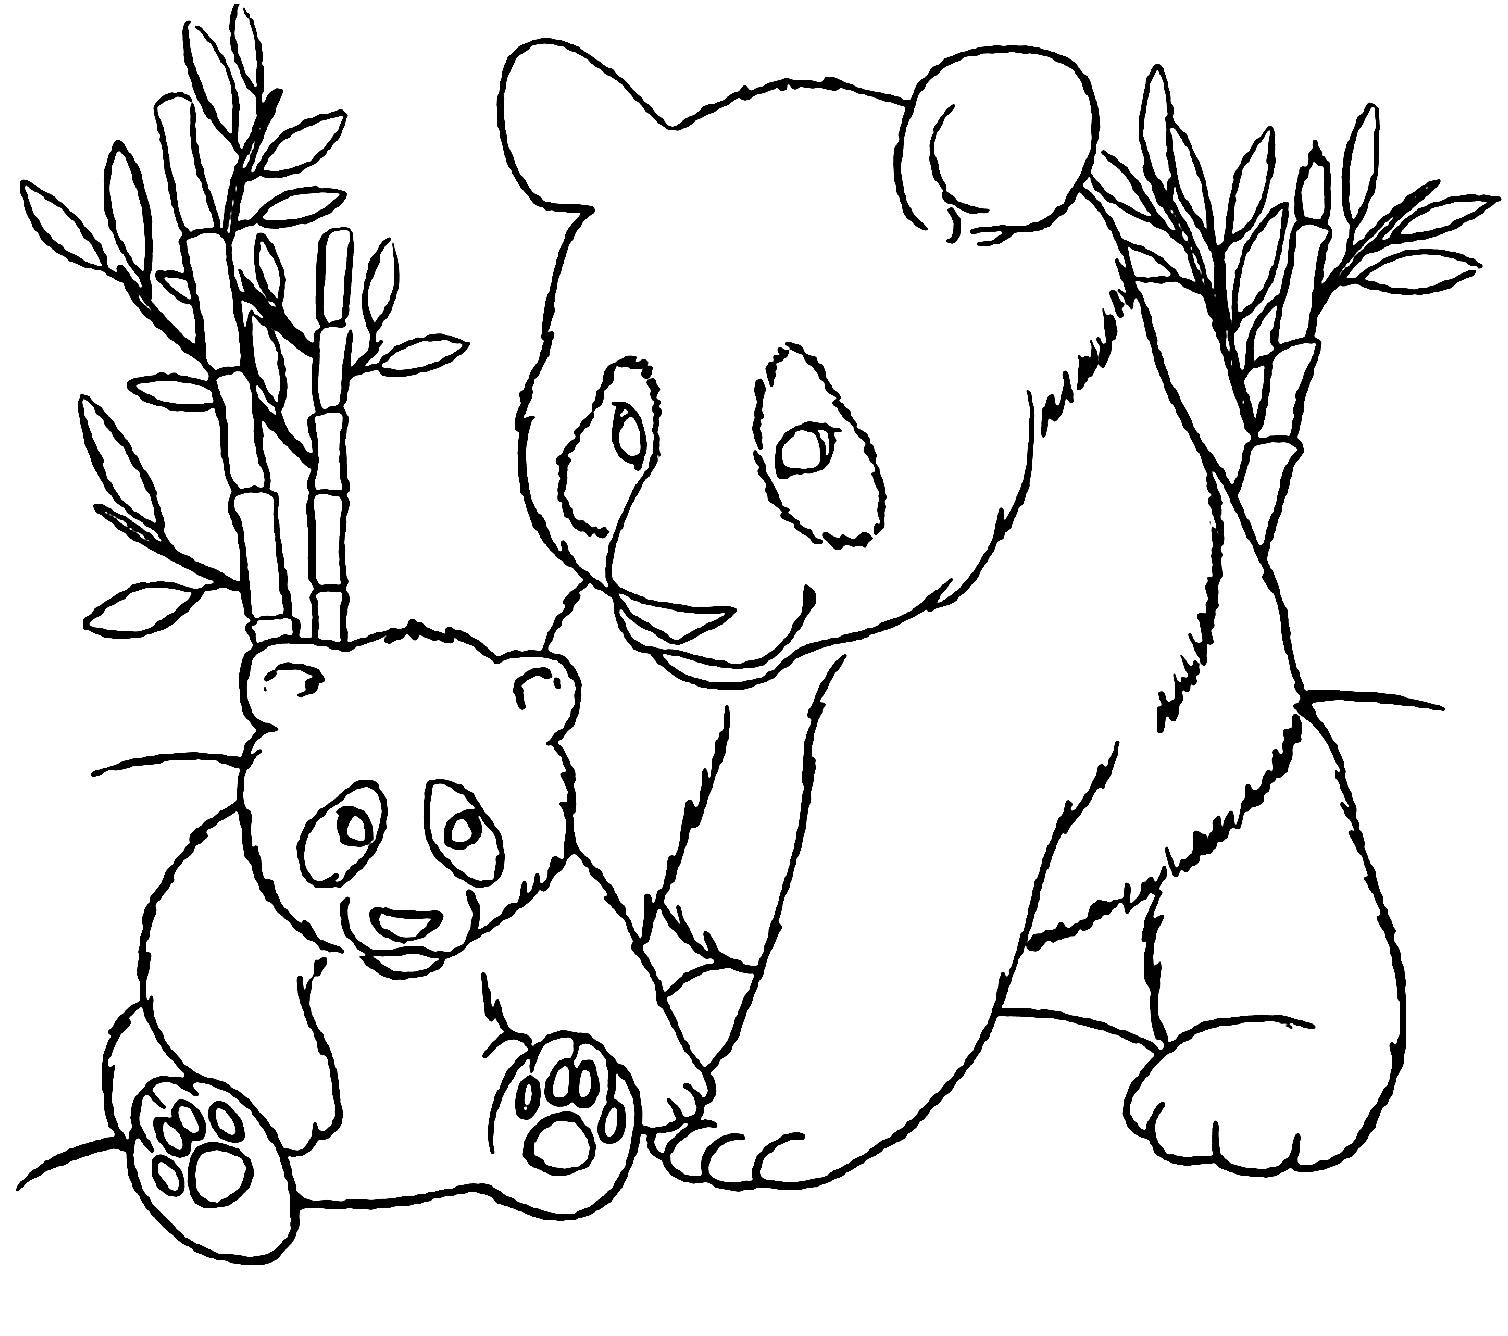 Mommy Panda with Baby Panda Coloring Page